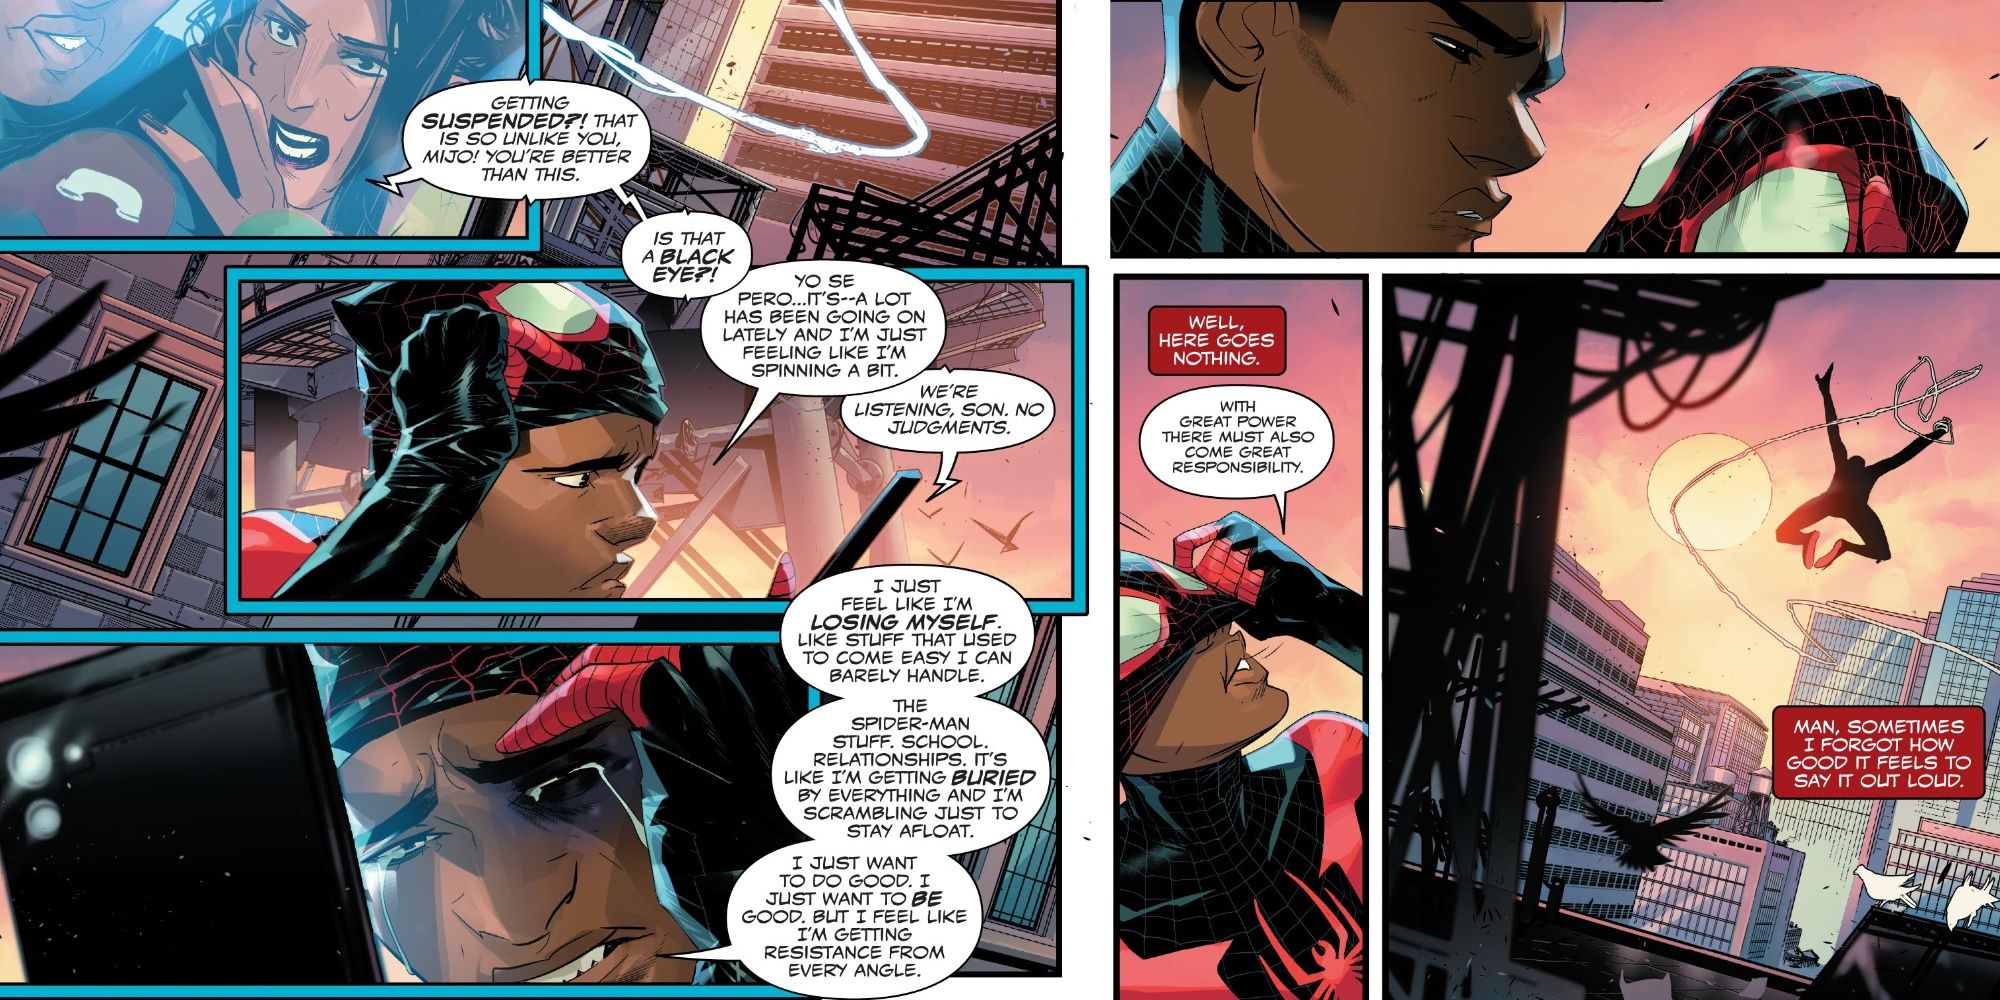 Miles Morales' Gets His Own Struggles As Spider-Man